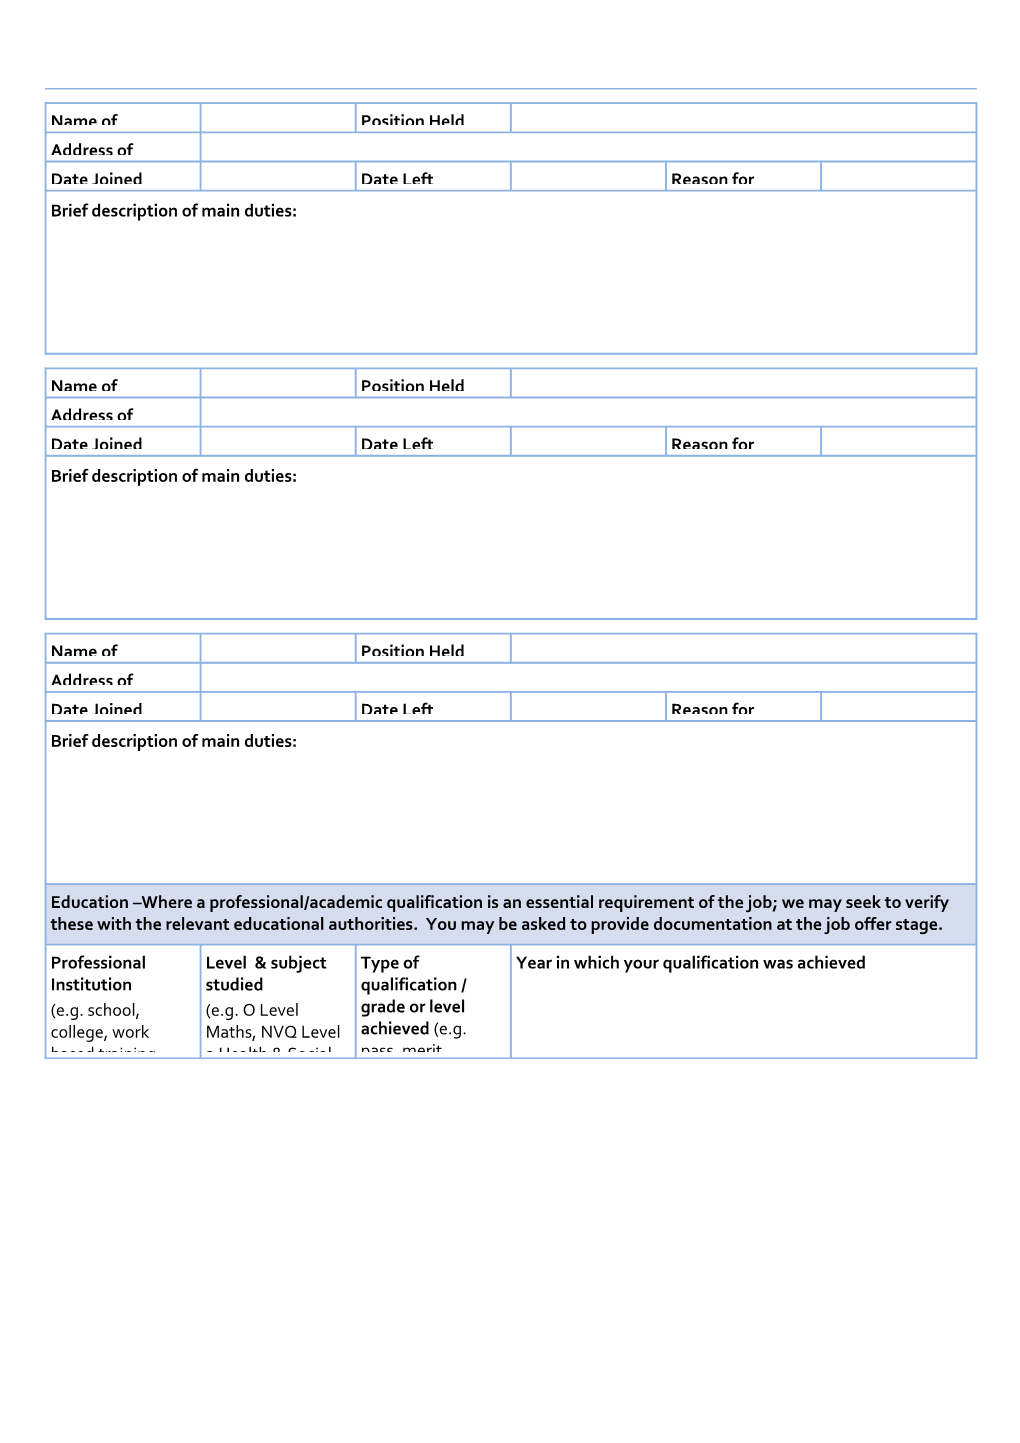 Any Offer of Employment Will Beconditional on Satisfactory Registration Checks with These